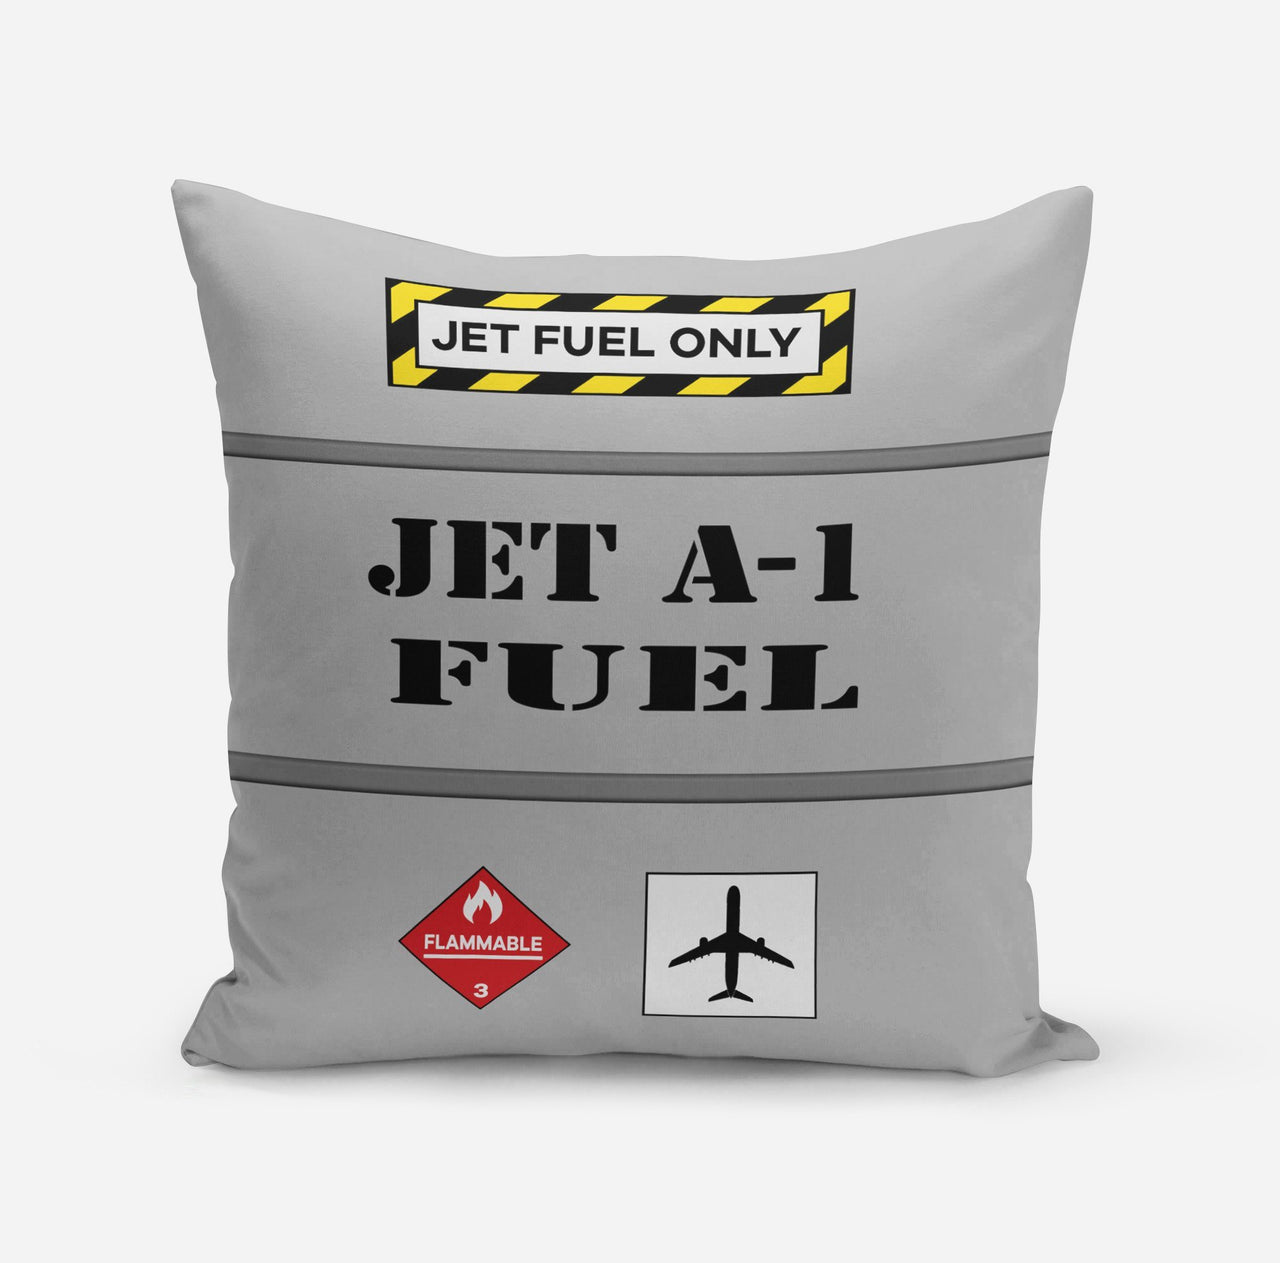 Jet Fuel Only Designed Pillows Pilot Eyes Store 